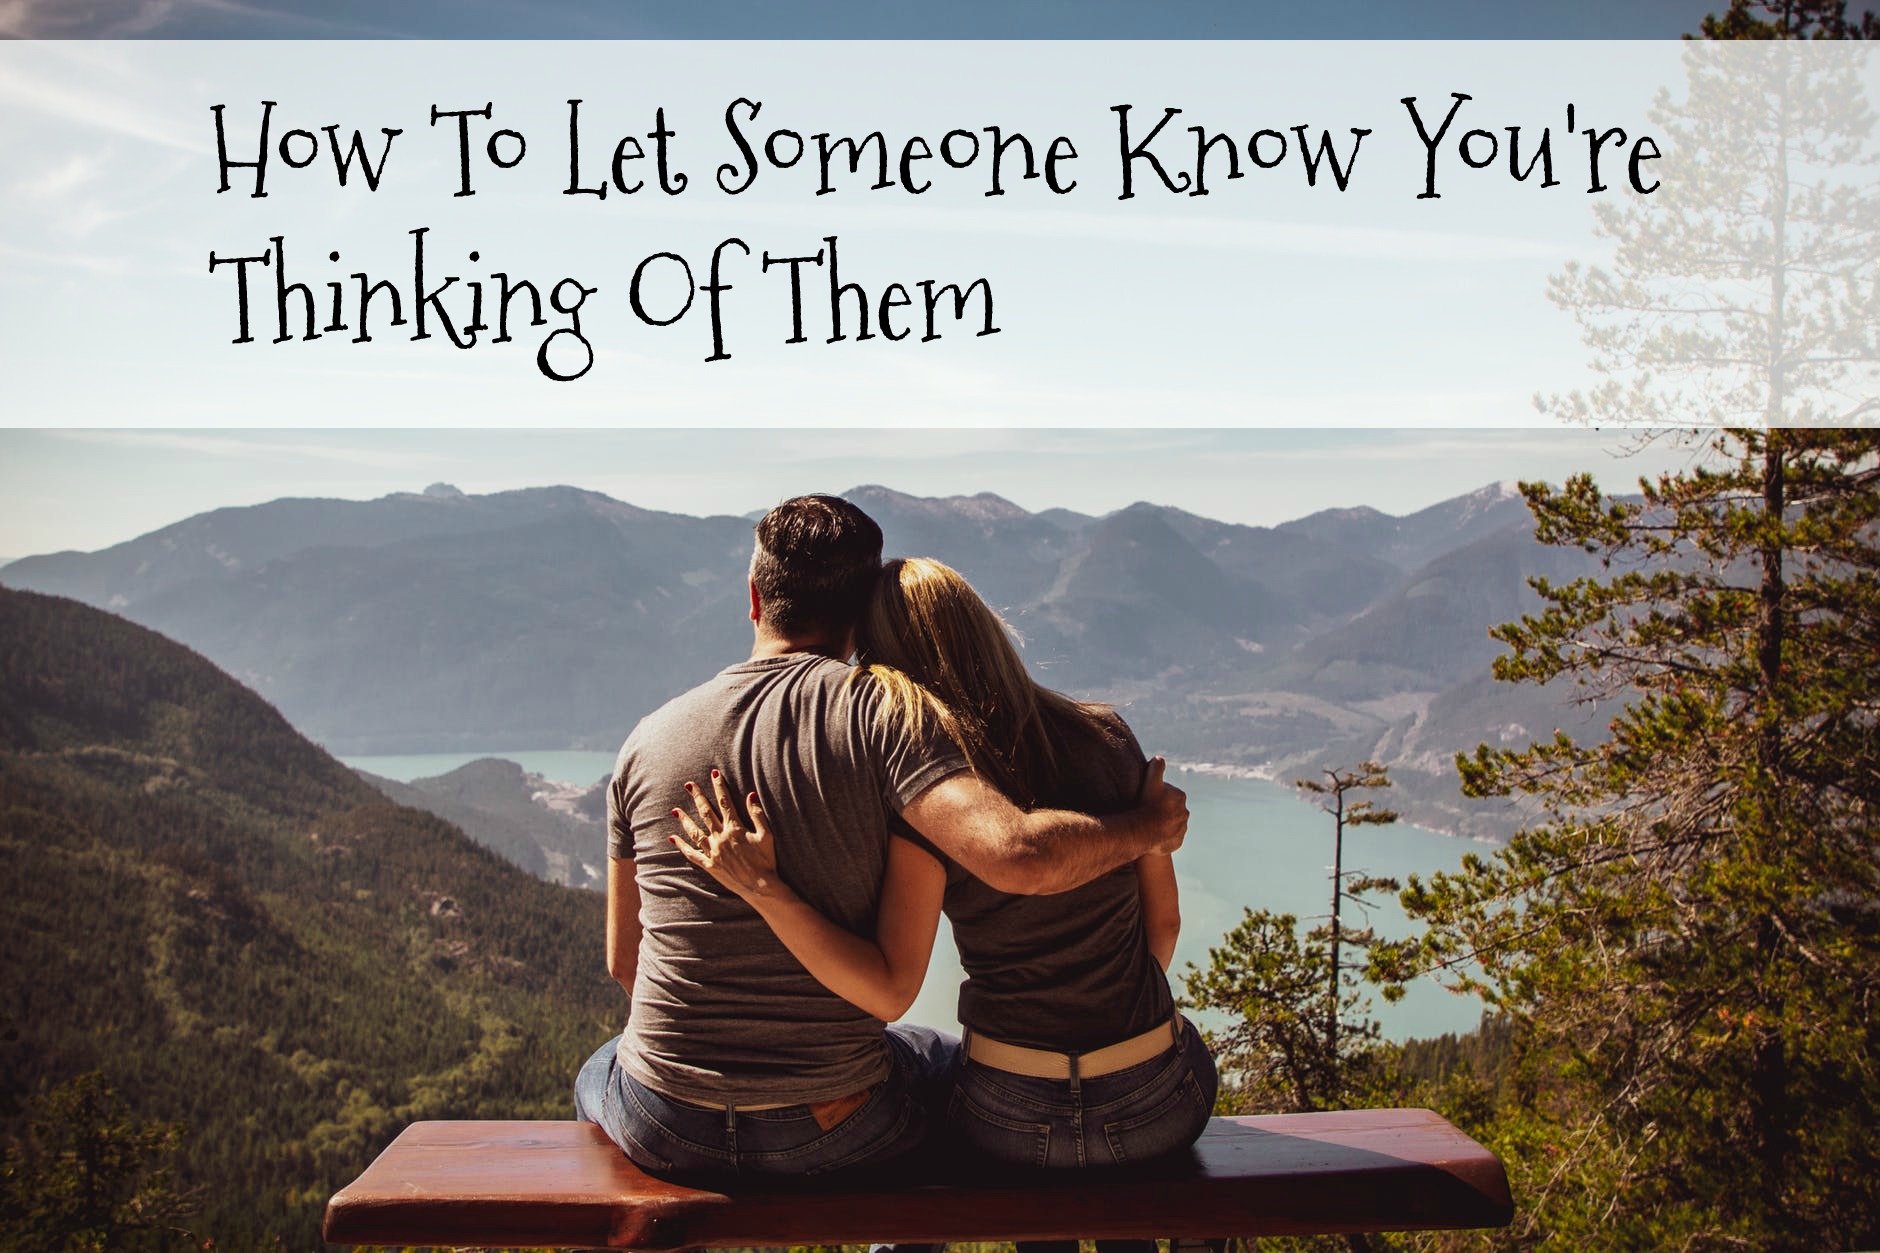 Let Someone Know You're Thinking Of Them